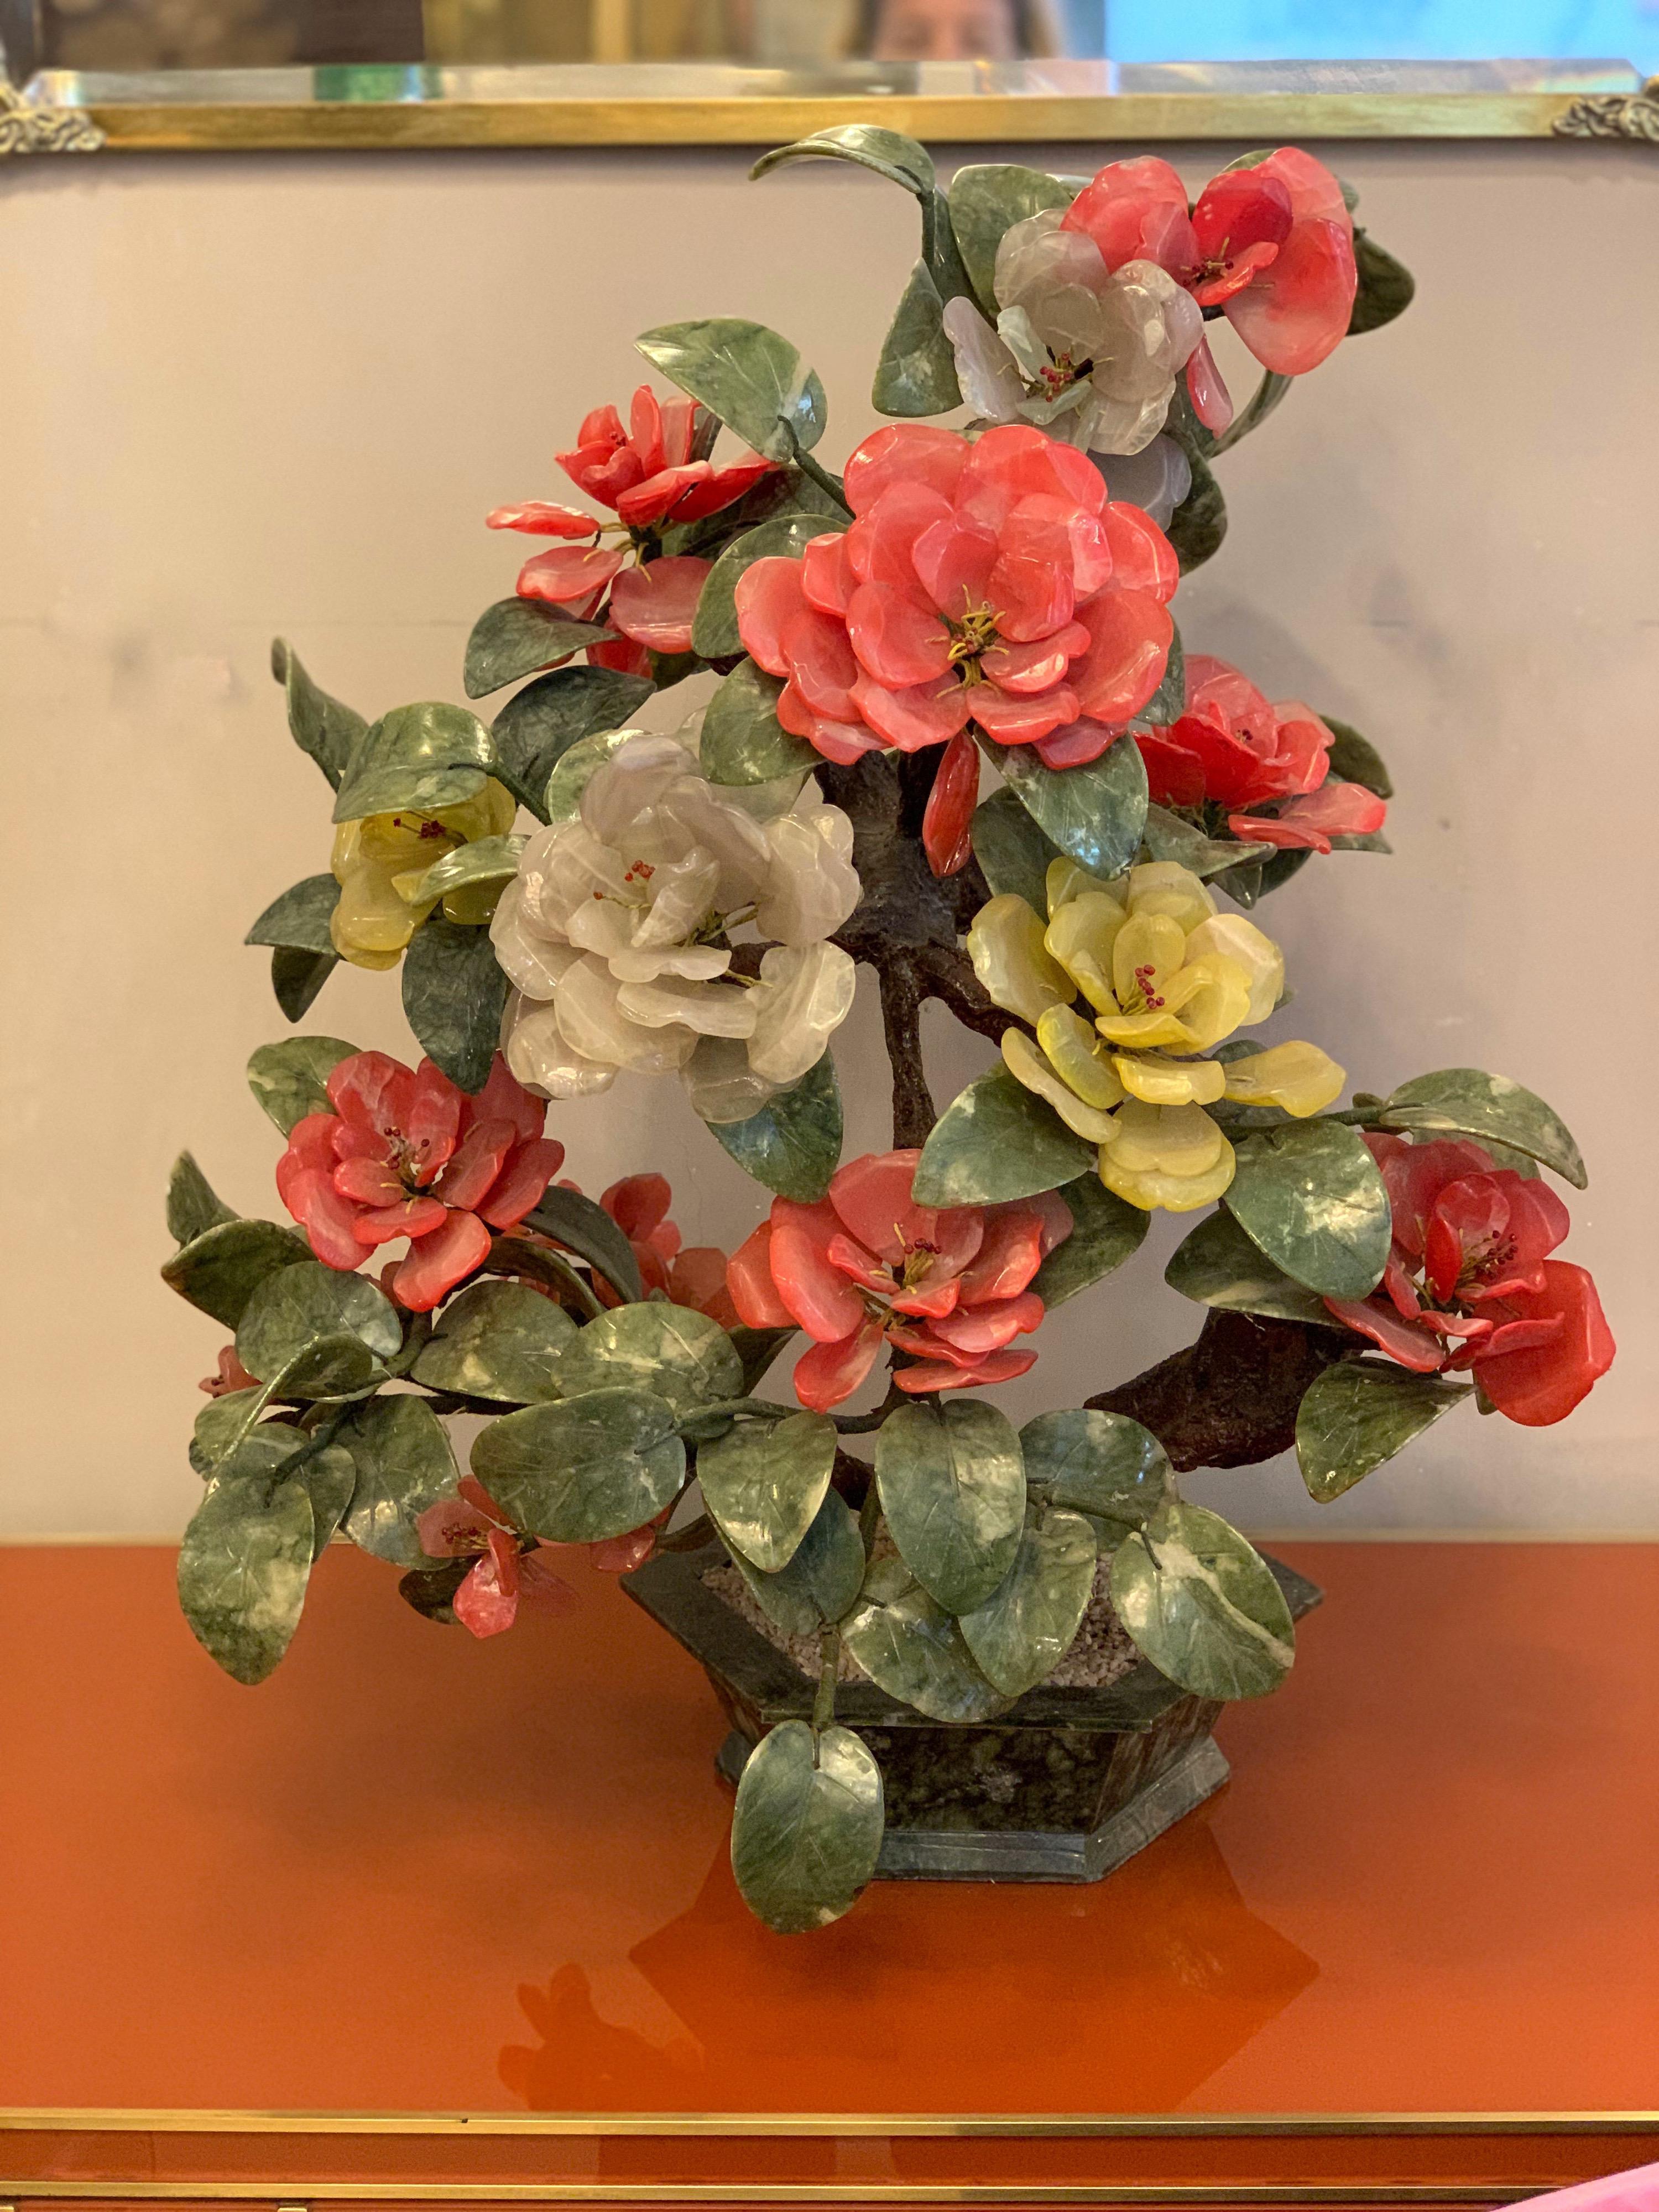 Chinoiserie jade onyx and quartz stones bonsai tree. Its faux bois tree trunk is firmly planted in a green granite pot, and every leaf and flower petal has been exquisitely carved. The leaves are of a jade green color stone, and the petals are in